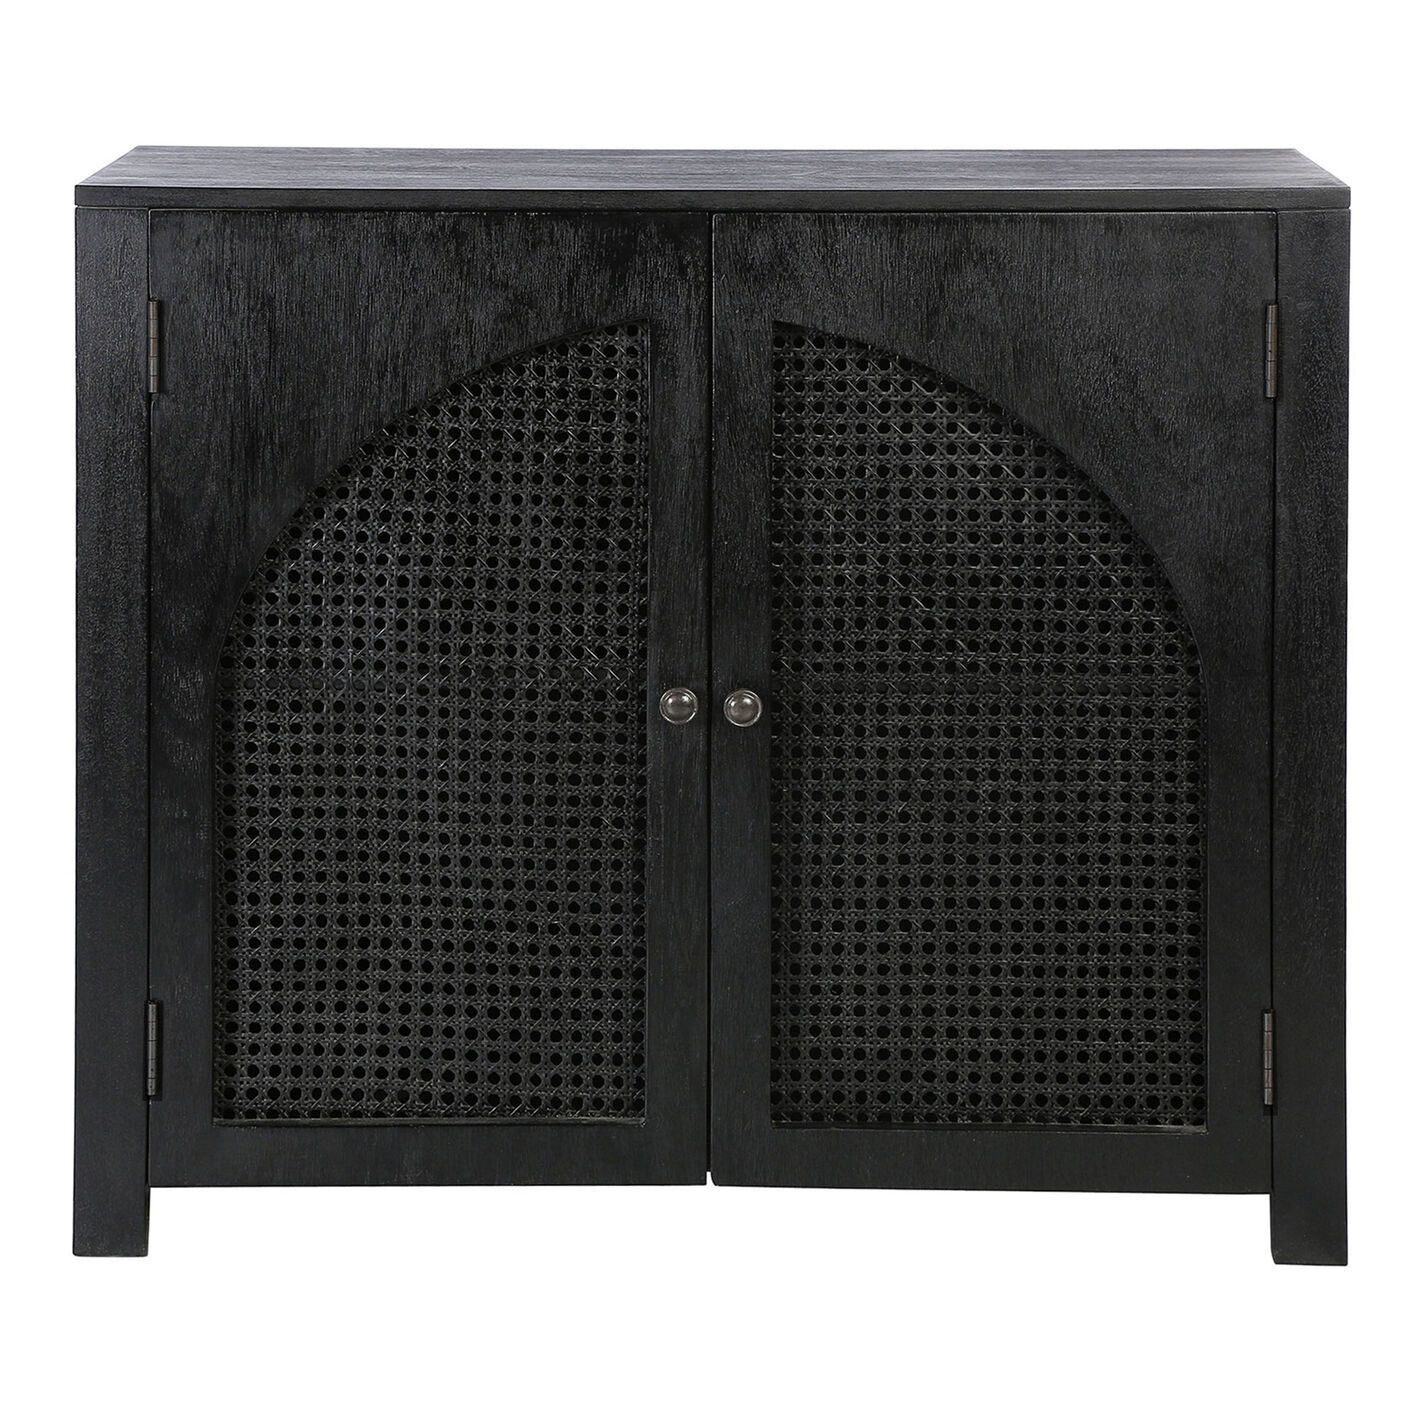 Seymour Wood and Rattan Cane Arched Door Storage Cabinet | World Market